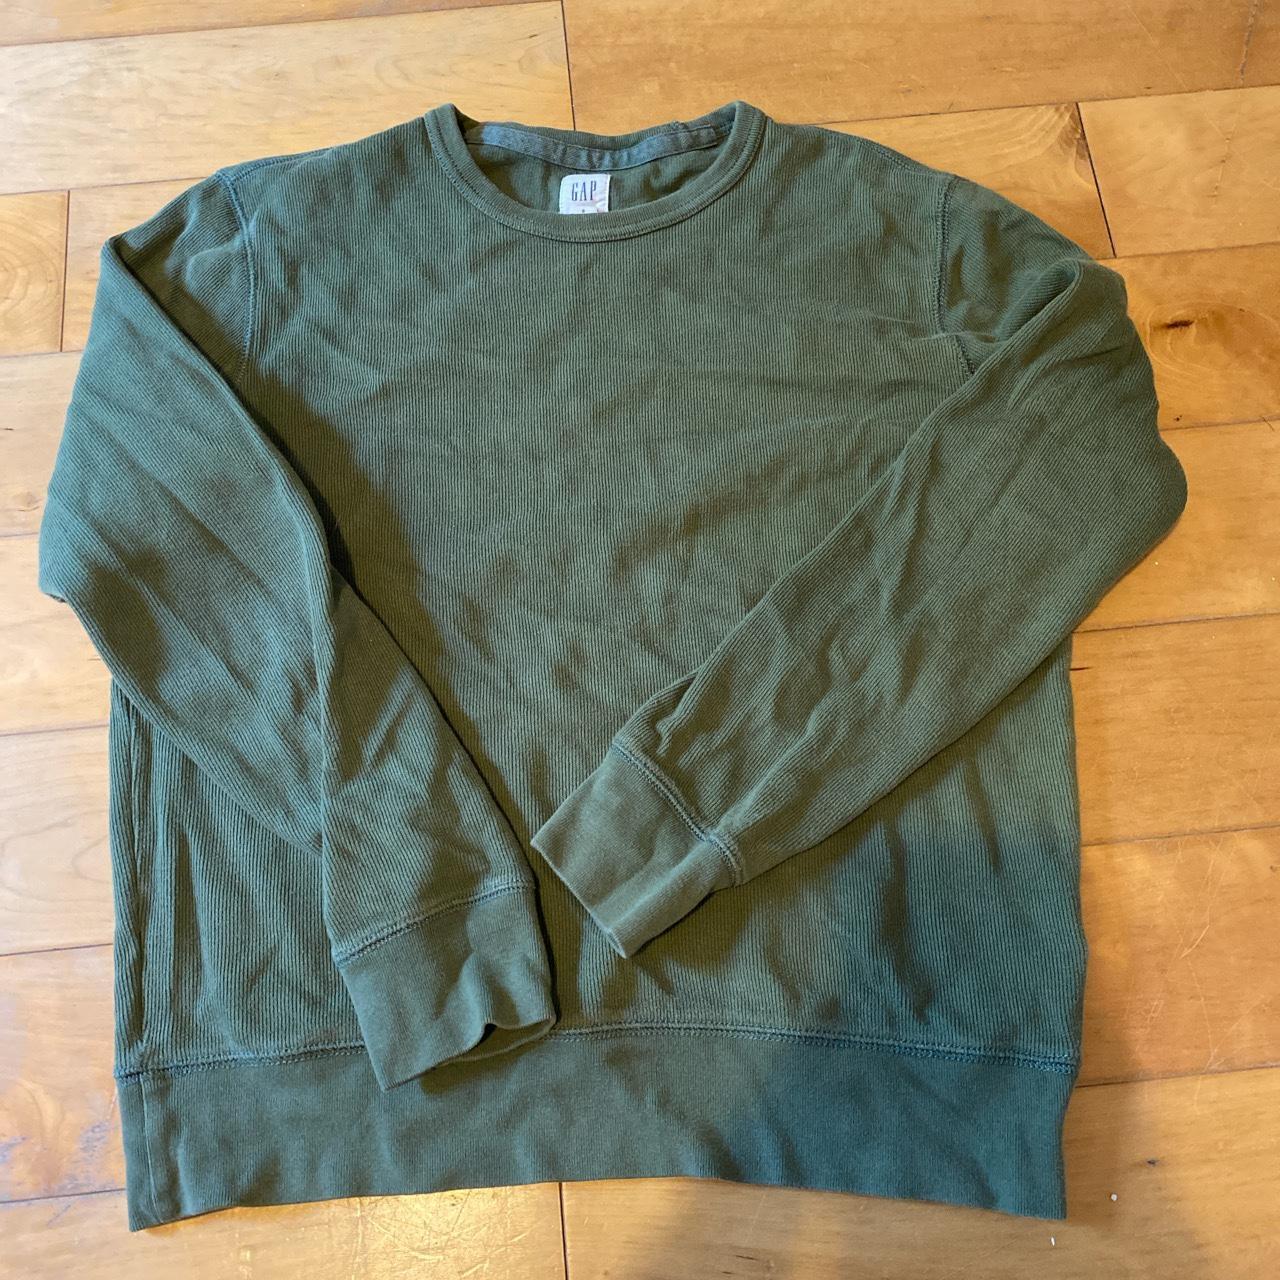 Green sweater from Gap Size small #gap #vintage... - Depop